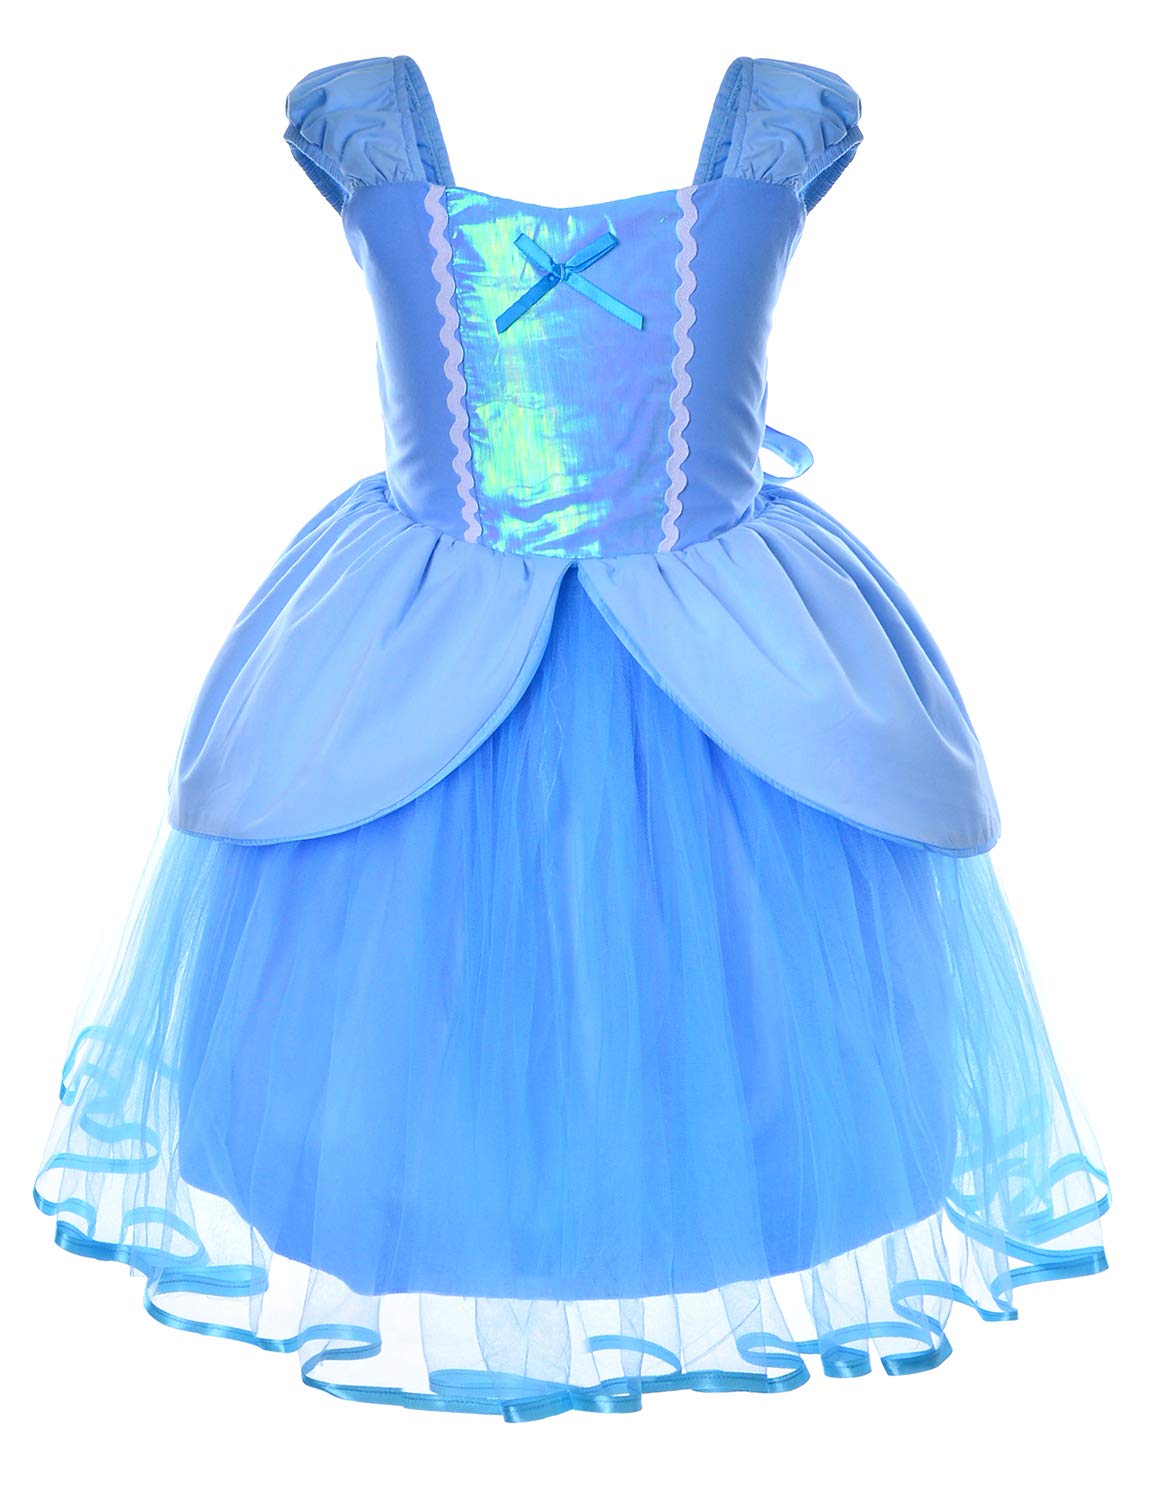 Little Girls Princess Costume for Birthday Party with Headband